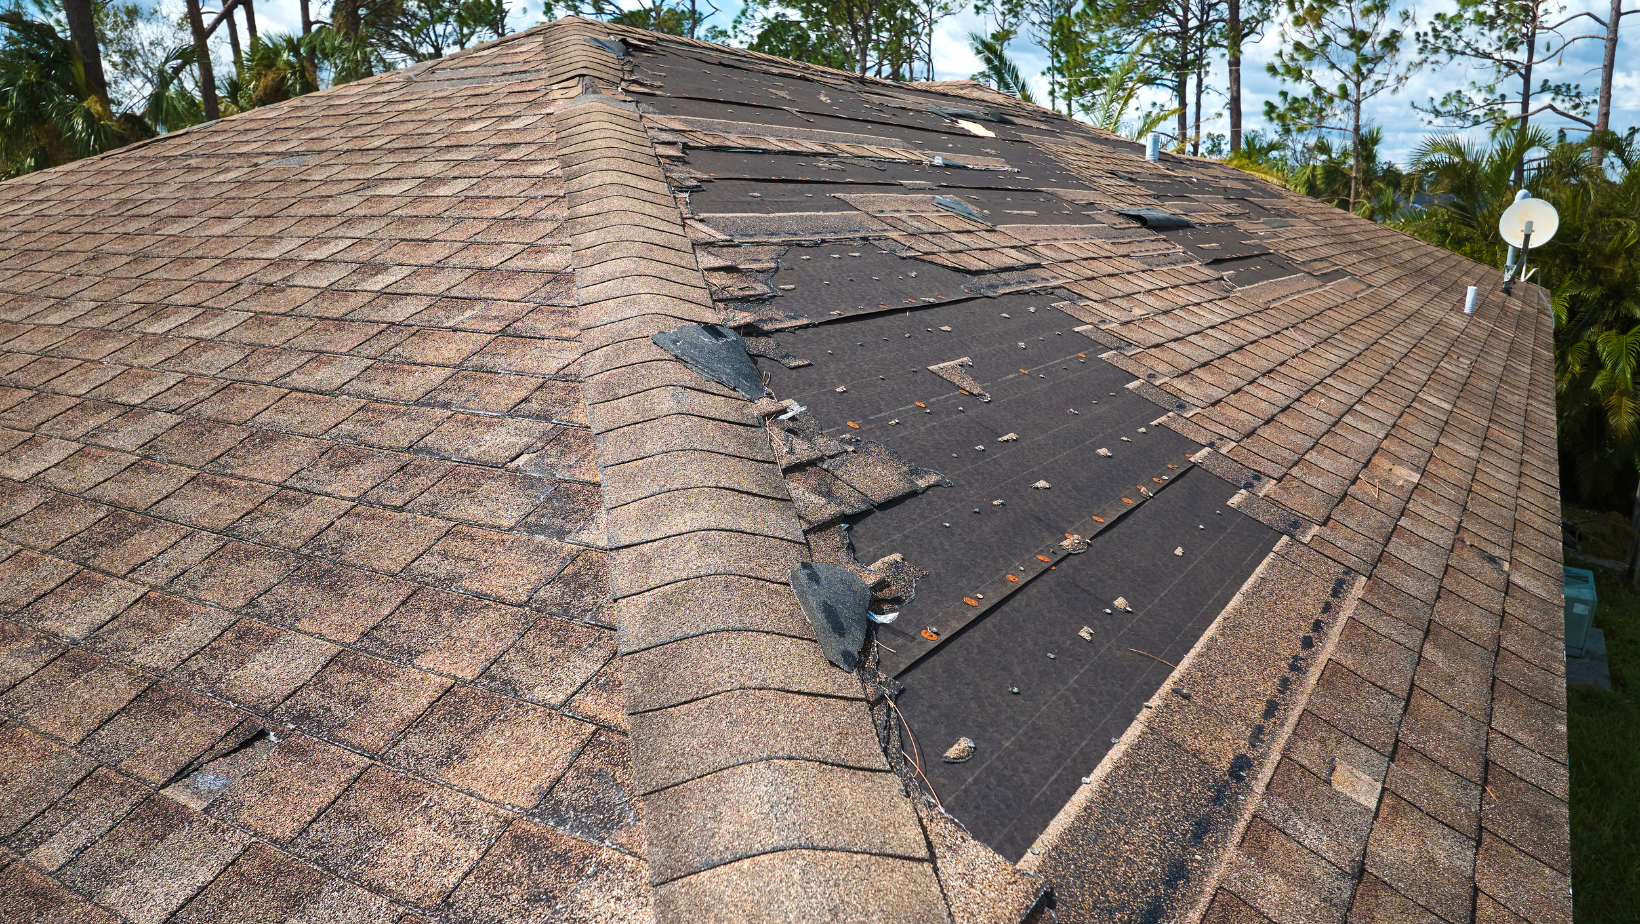 A shingle roof in need of repair